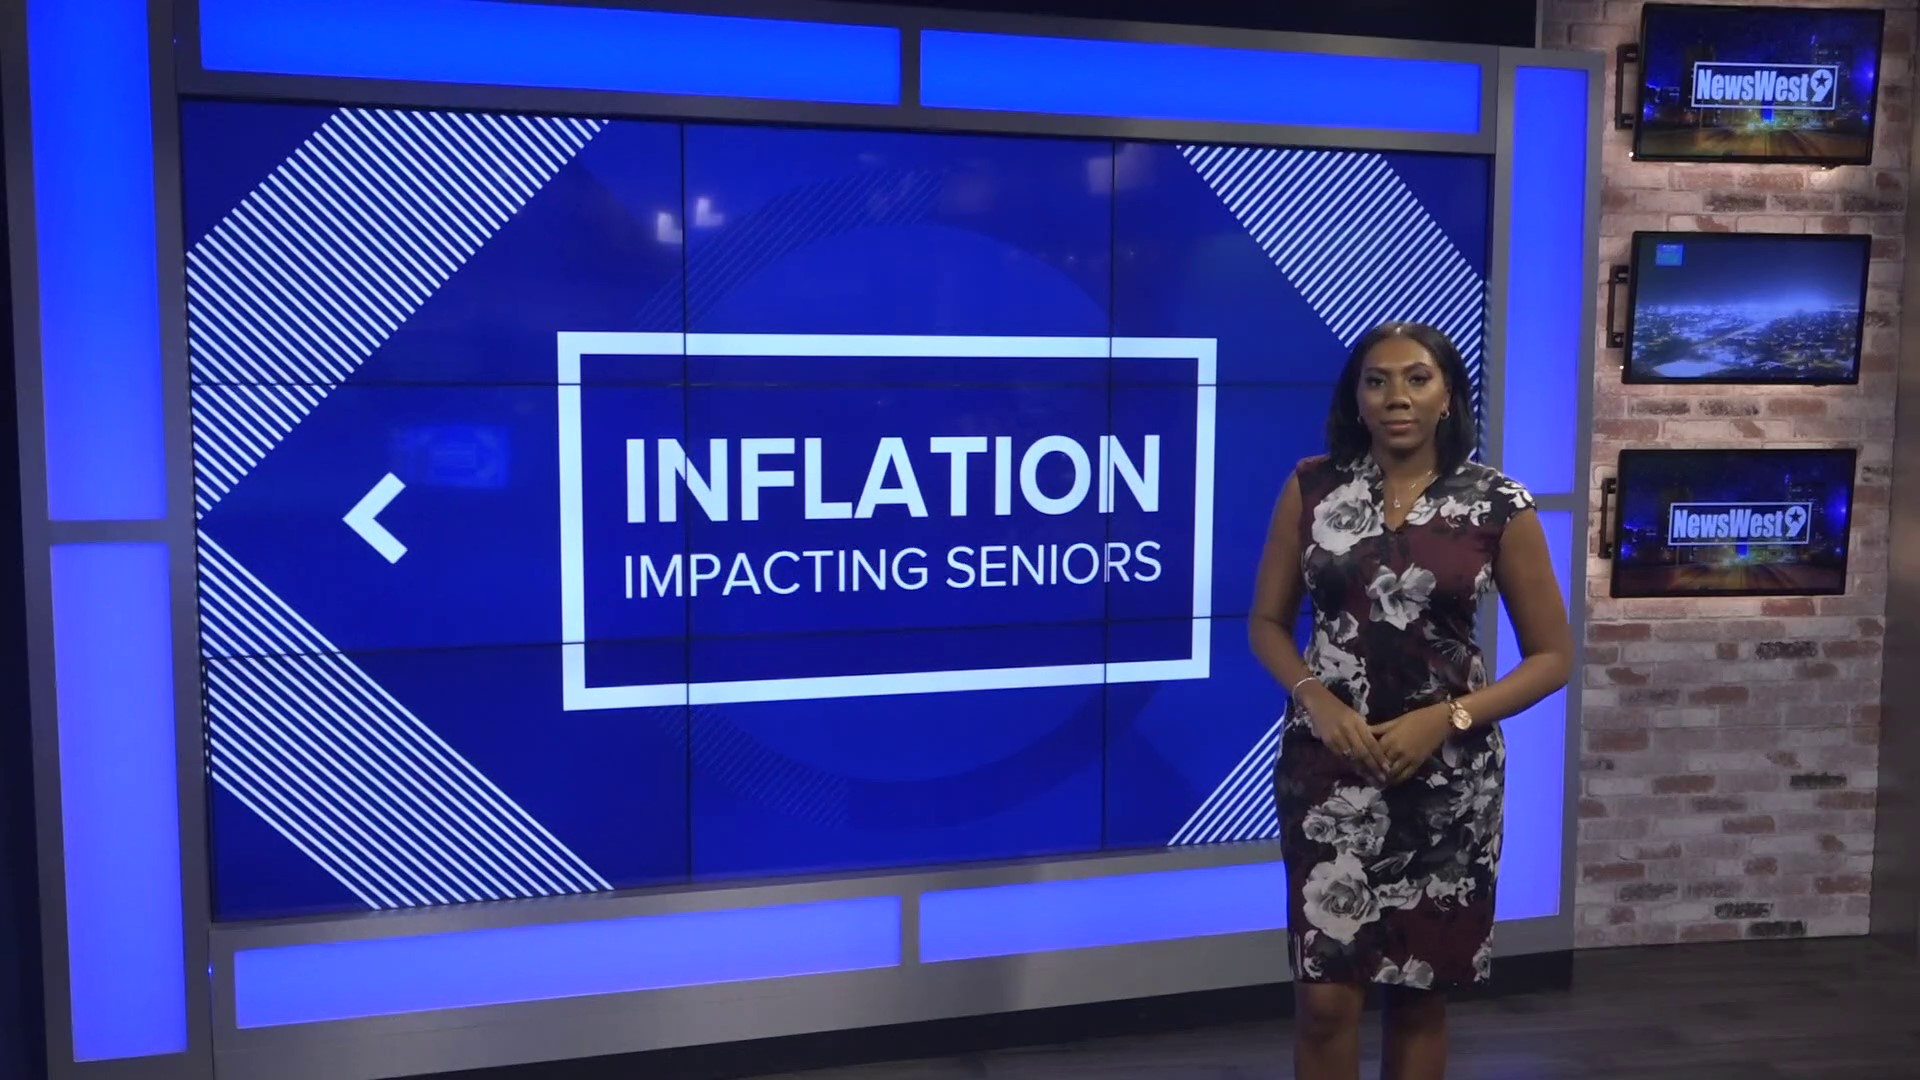 Aquilla Watson is a 78-year-old Midland woman who is on a fixed income and is trying to stay afloat due to inflation.